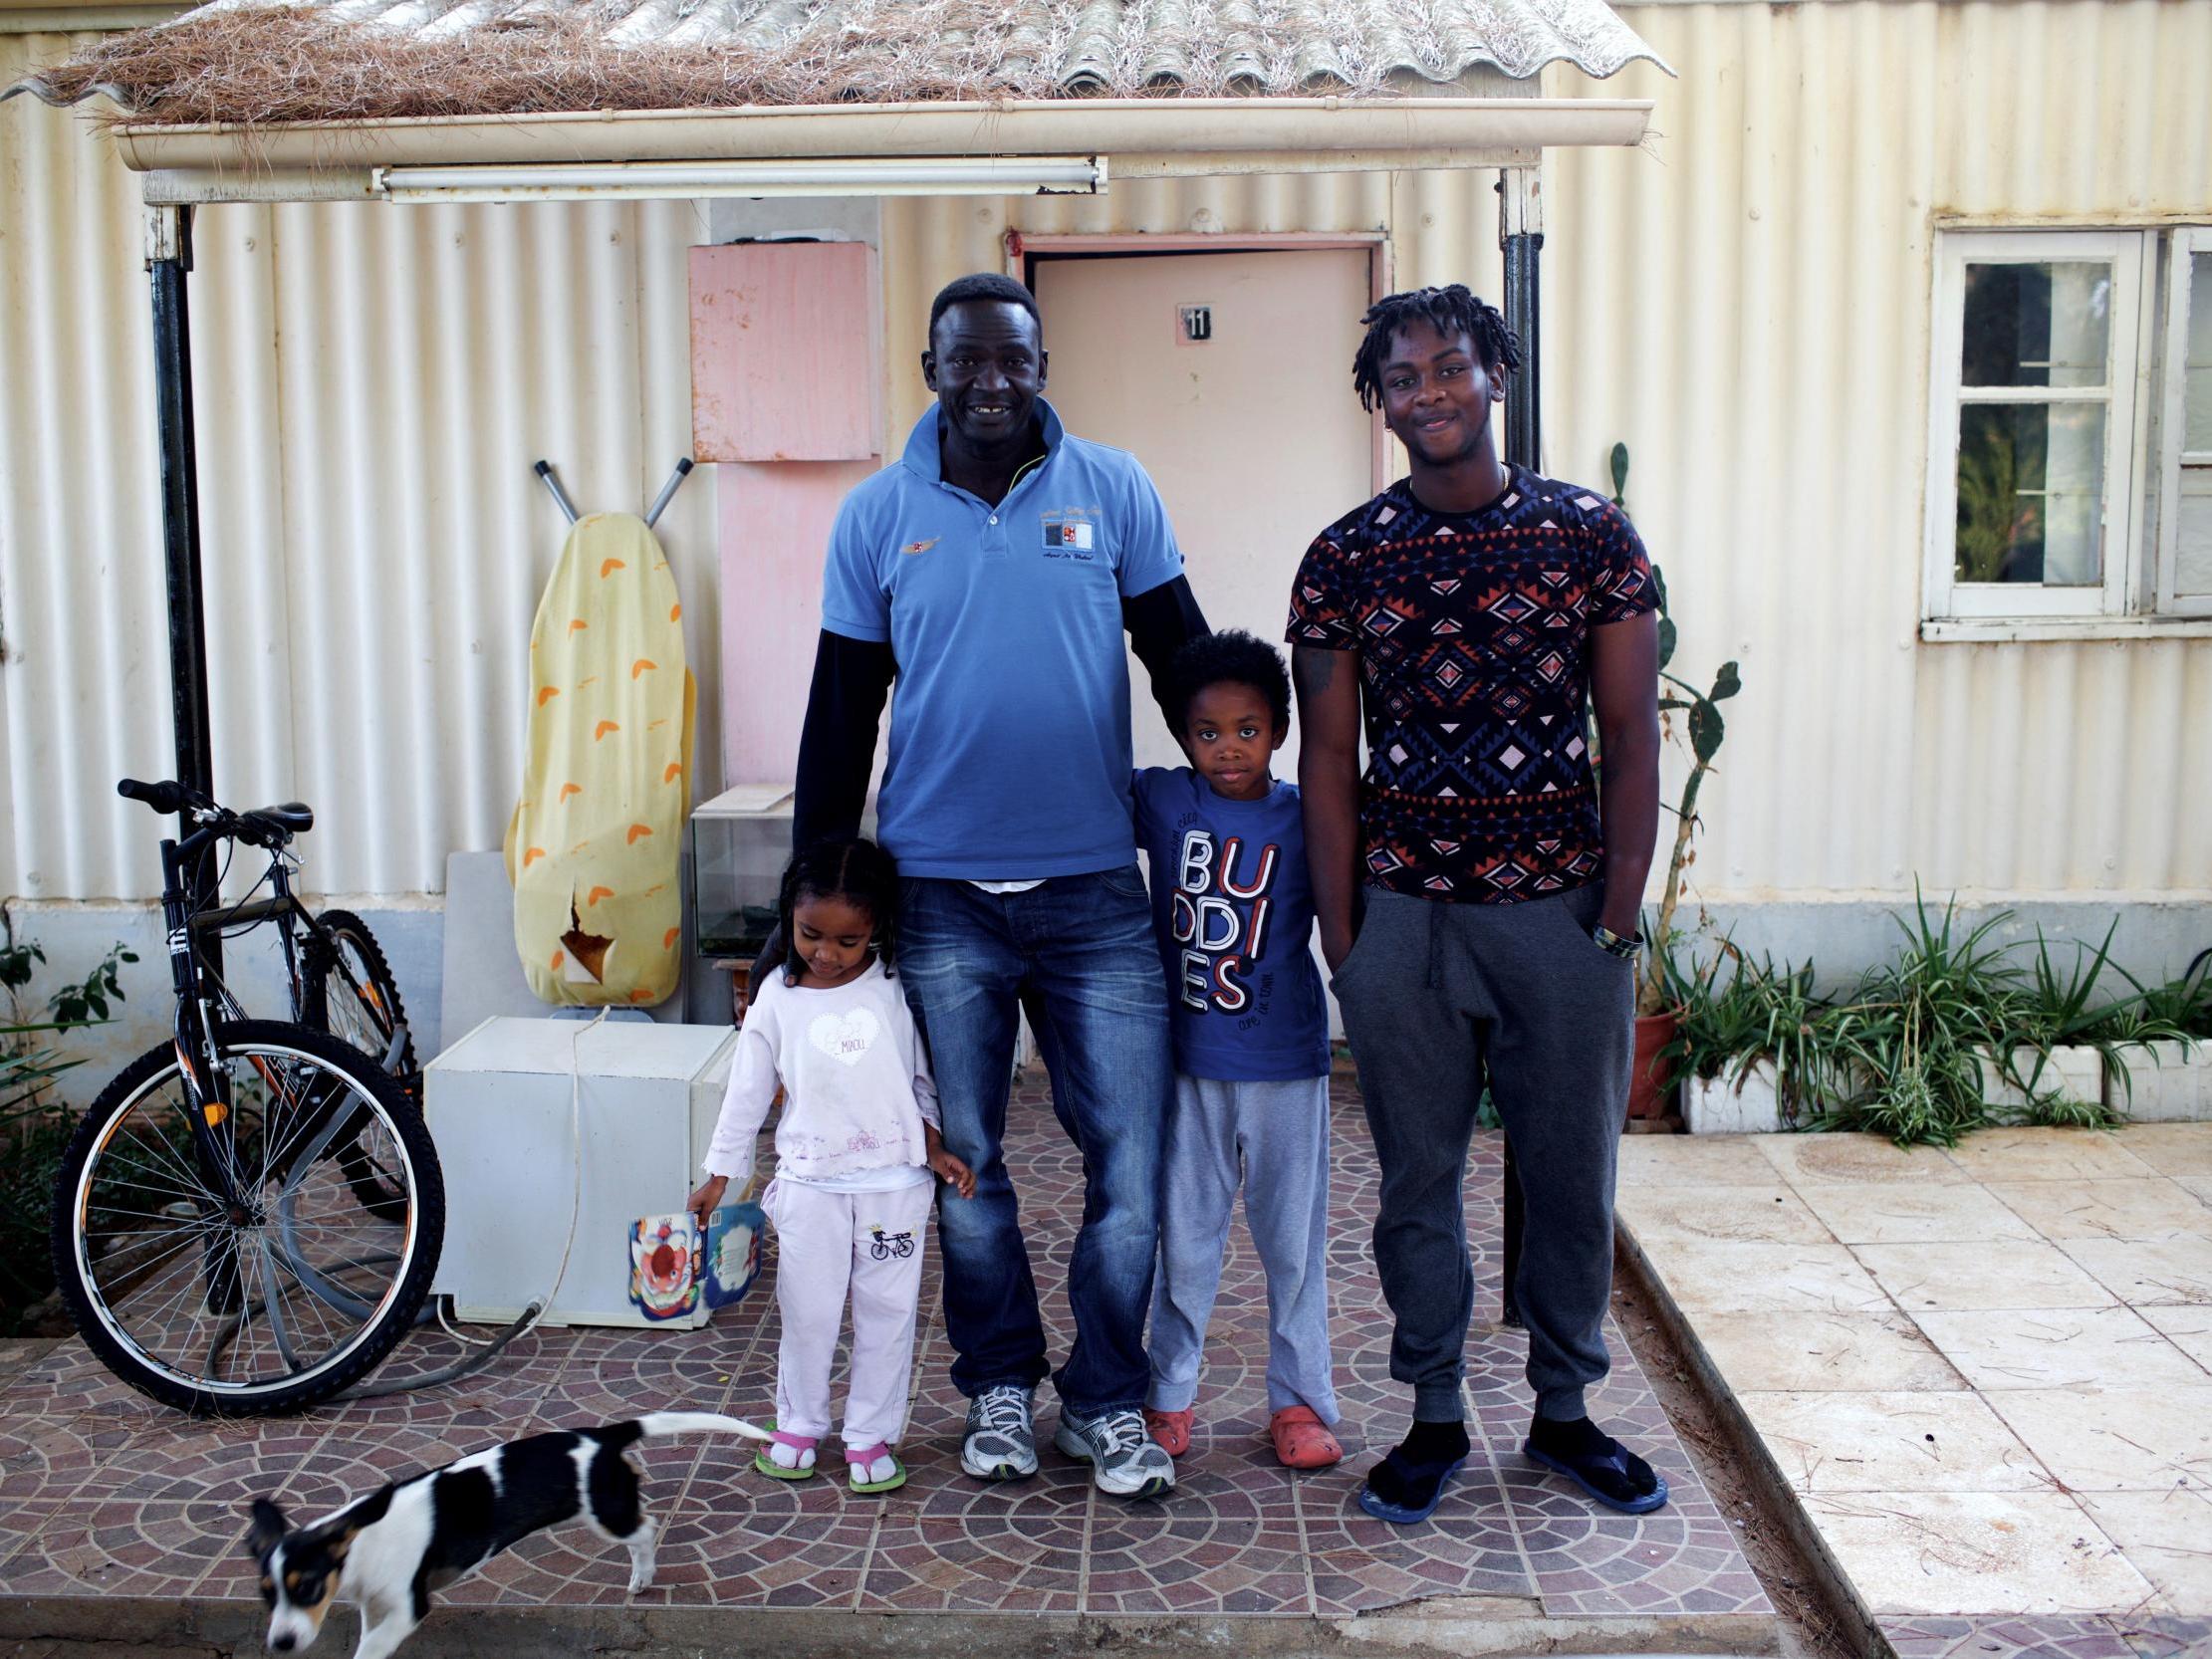 Sudanese refugee Taj Bashir, 43, with his children at the UK's Dhekelia military base, where he has lived for 20 years